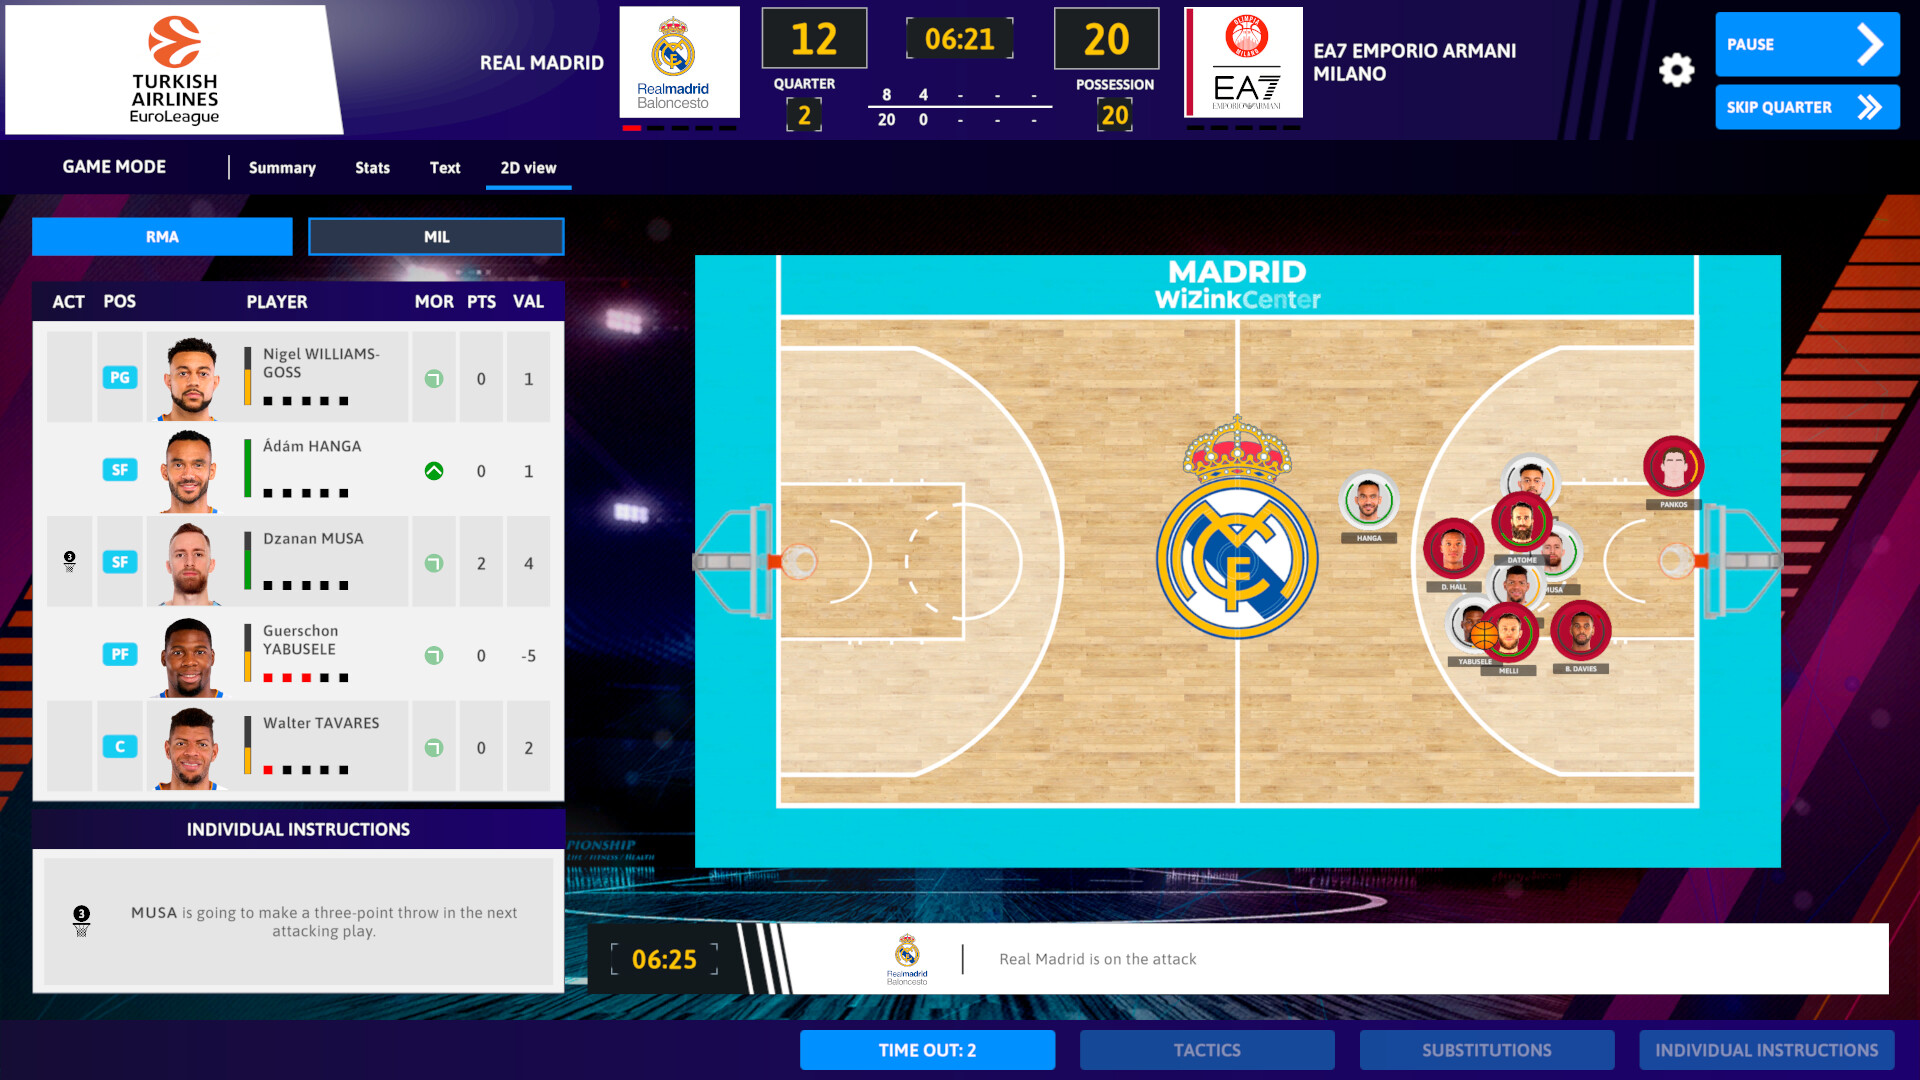 International Basketball Manager 23 Free Download for PC